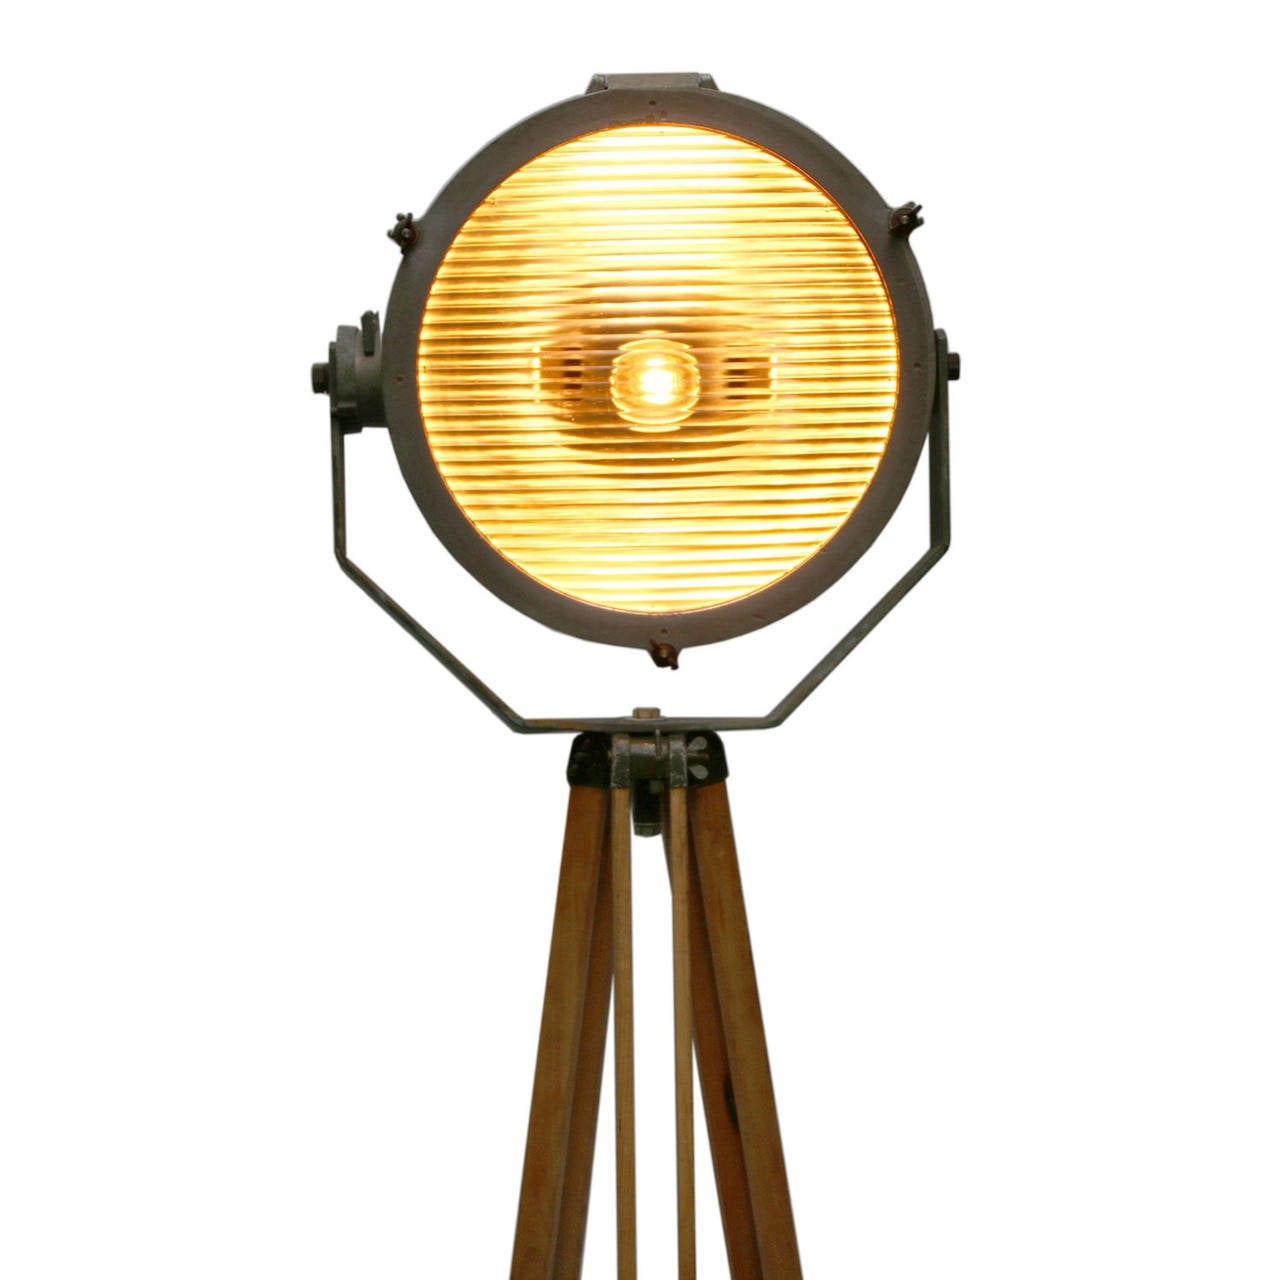 Vintage industrial spotlight on wooden tripod.
Adjustable height and angle.
Metal spot with clear striped glass cover.
Diameter spot 40 cm.
Total height as shown in picture: 205 cm.
Electra wire 4 meter. UL Listed wiring.

All lamps have been